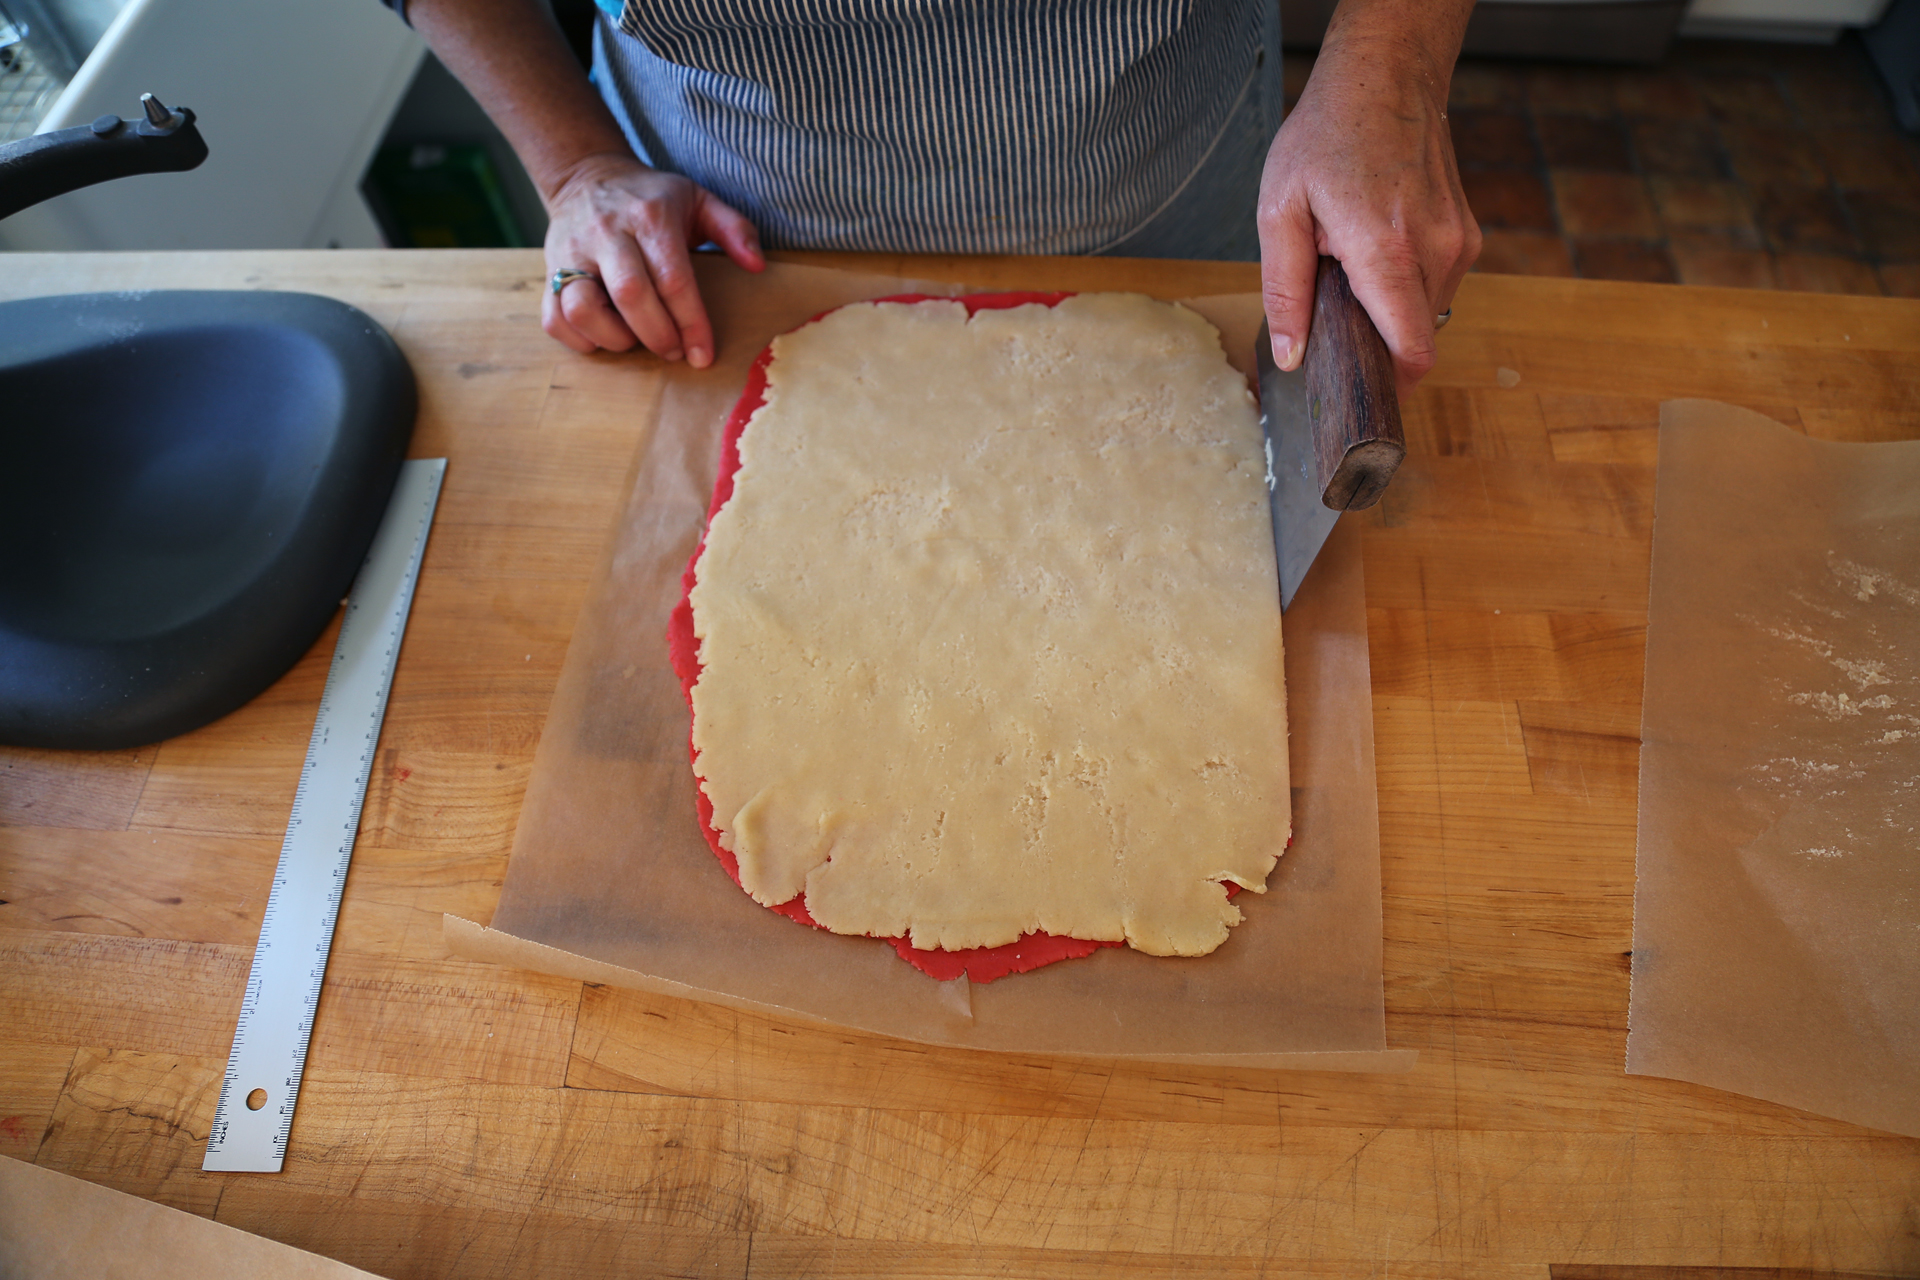 Trim the edges to even off the two rectangles of dough.